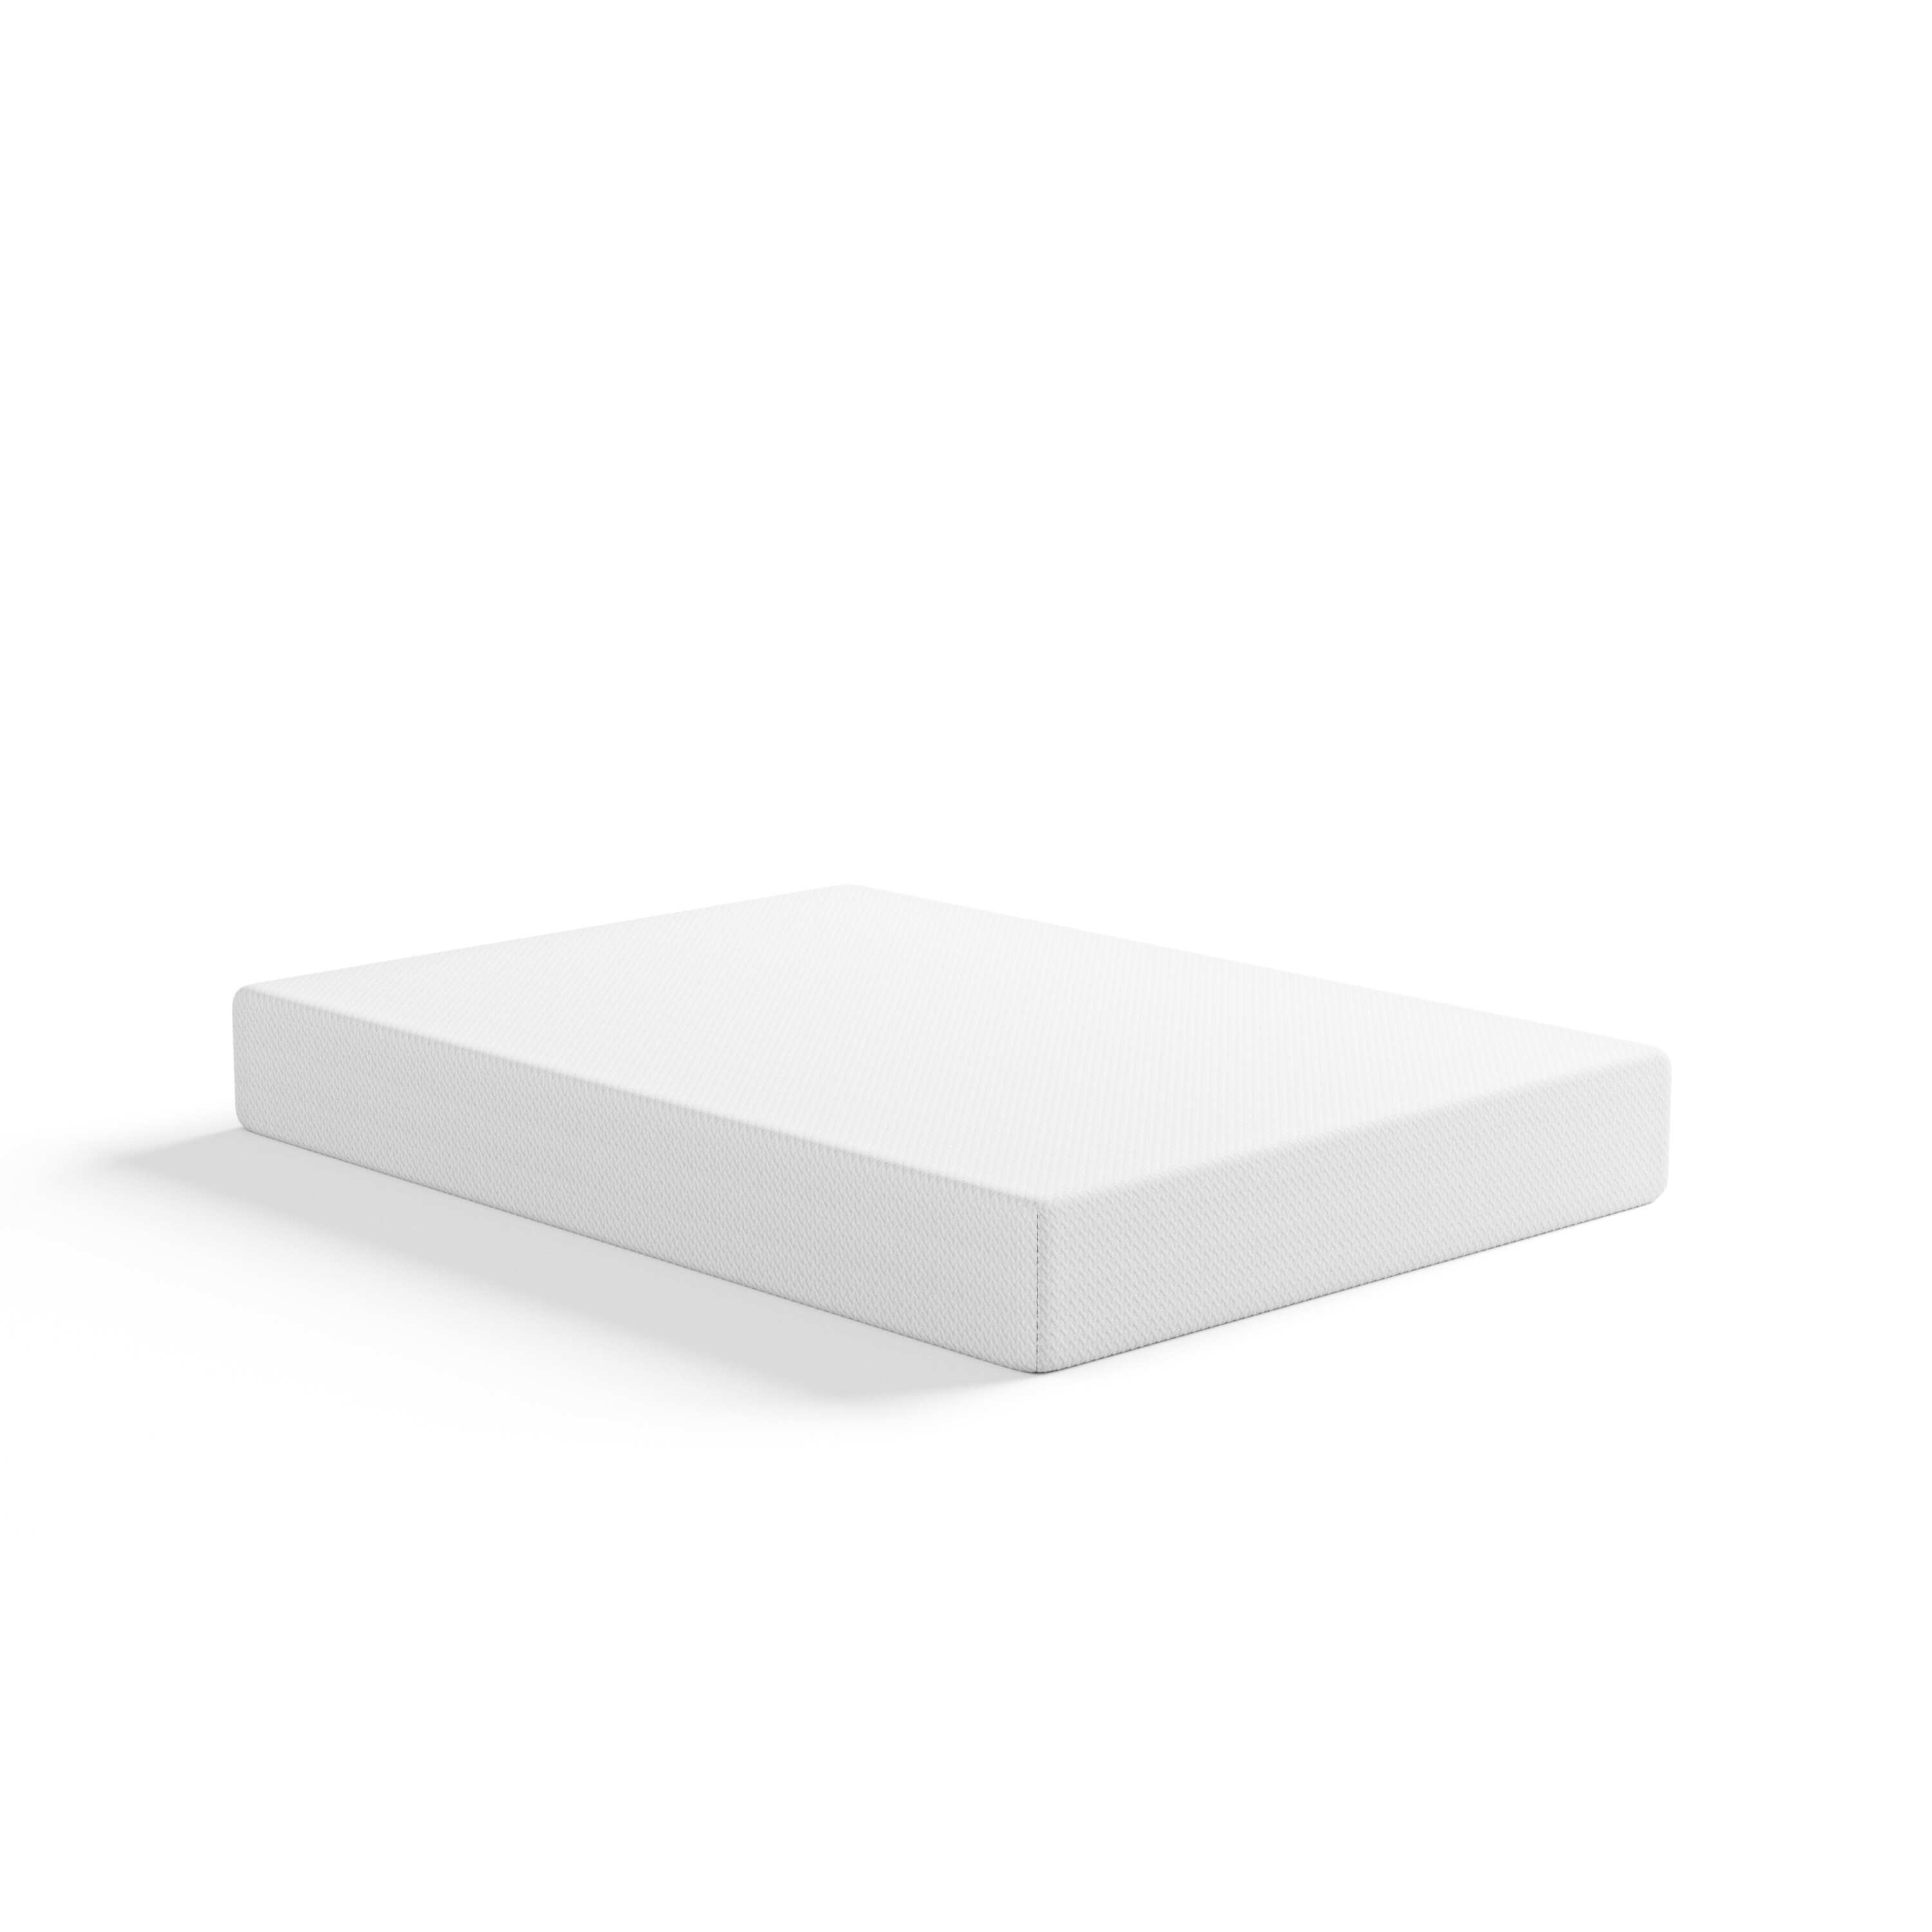 A1Sleep Airess Collection 10-inch Bamboo Charcoal-Infused Memory Foam Mattress